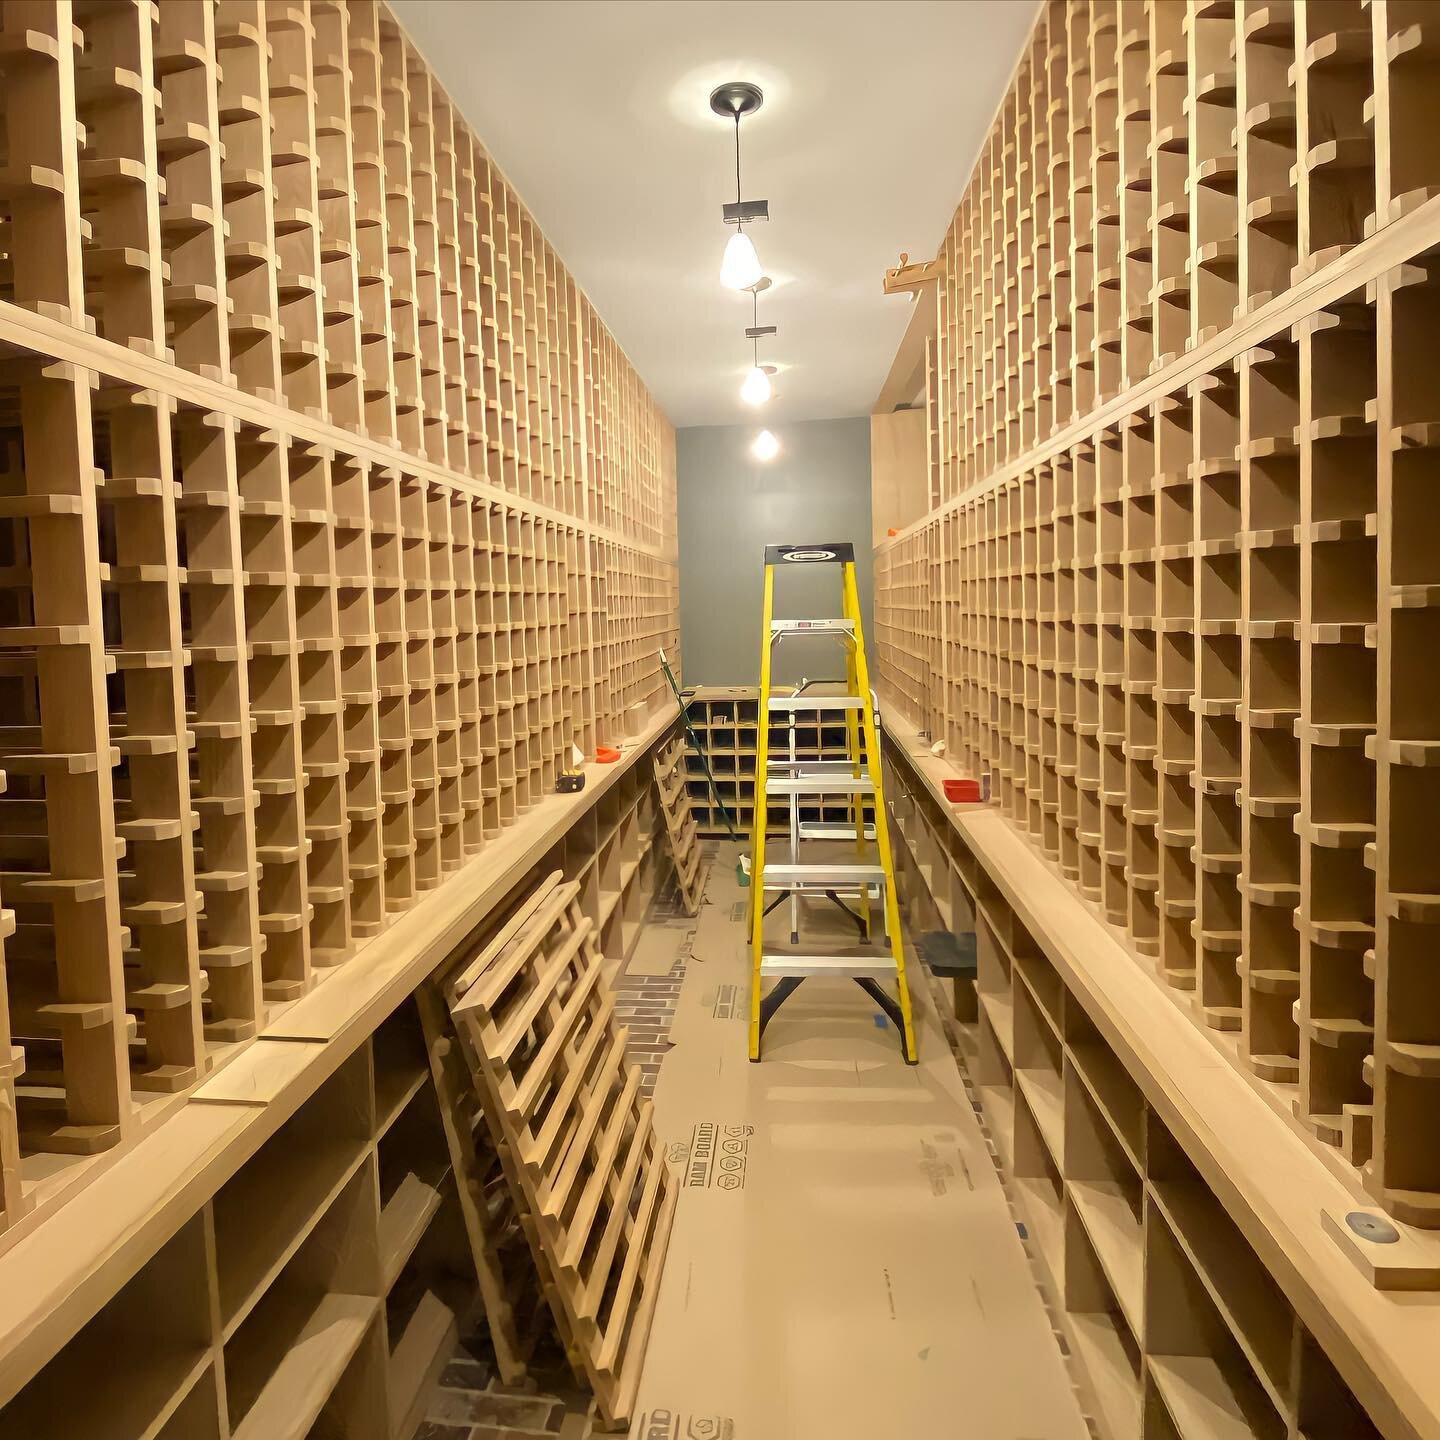 &ldquo;Wine&rdquo; down Wednesday&hellip;the perfect time to share some progress shots of this custom White Oak wine cellar. Check back for more photos. 
&bull;
&bull;
&bull;
&bull;
&bull;
&bull;
&bull;
&bull;
&bull;
&bull;
&bull;
&bull;
&bull;
&bull